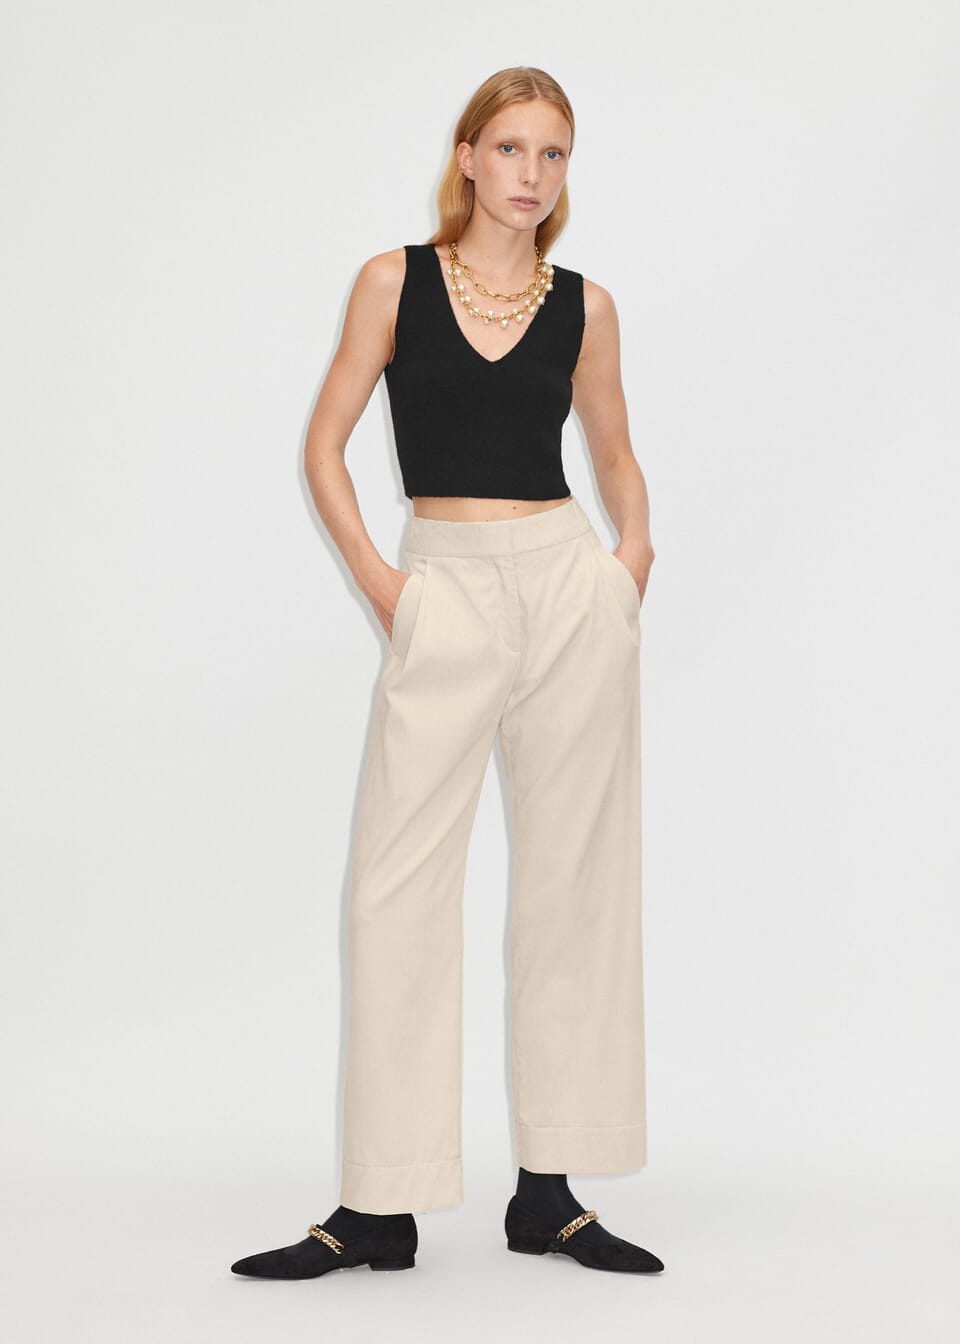 Pure cotton with a velvet-like hand feel and fluid drape defines this tapered-leg trouser. A workdrobe stalwart, it complements classic shirting for an effortlessly polished AM-PM office-ready look while elevating casual weekend staples.